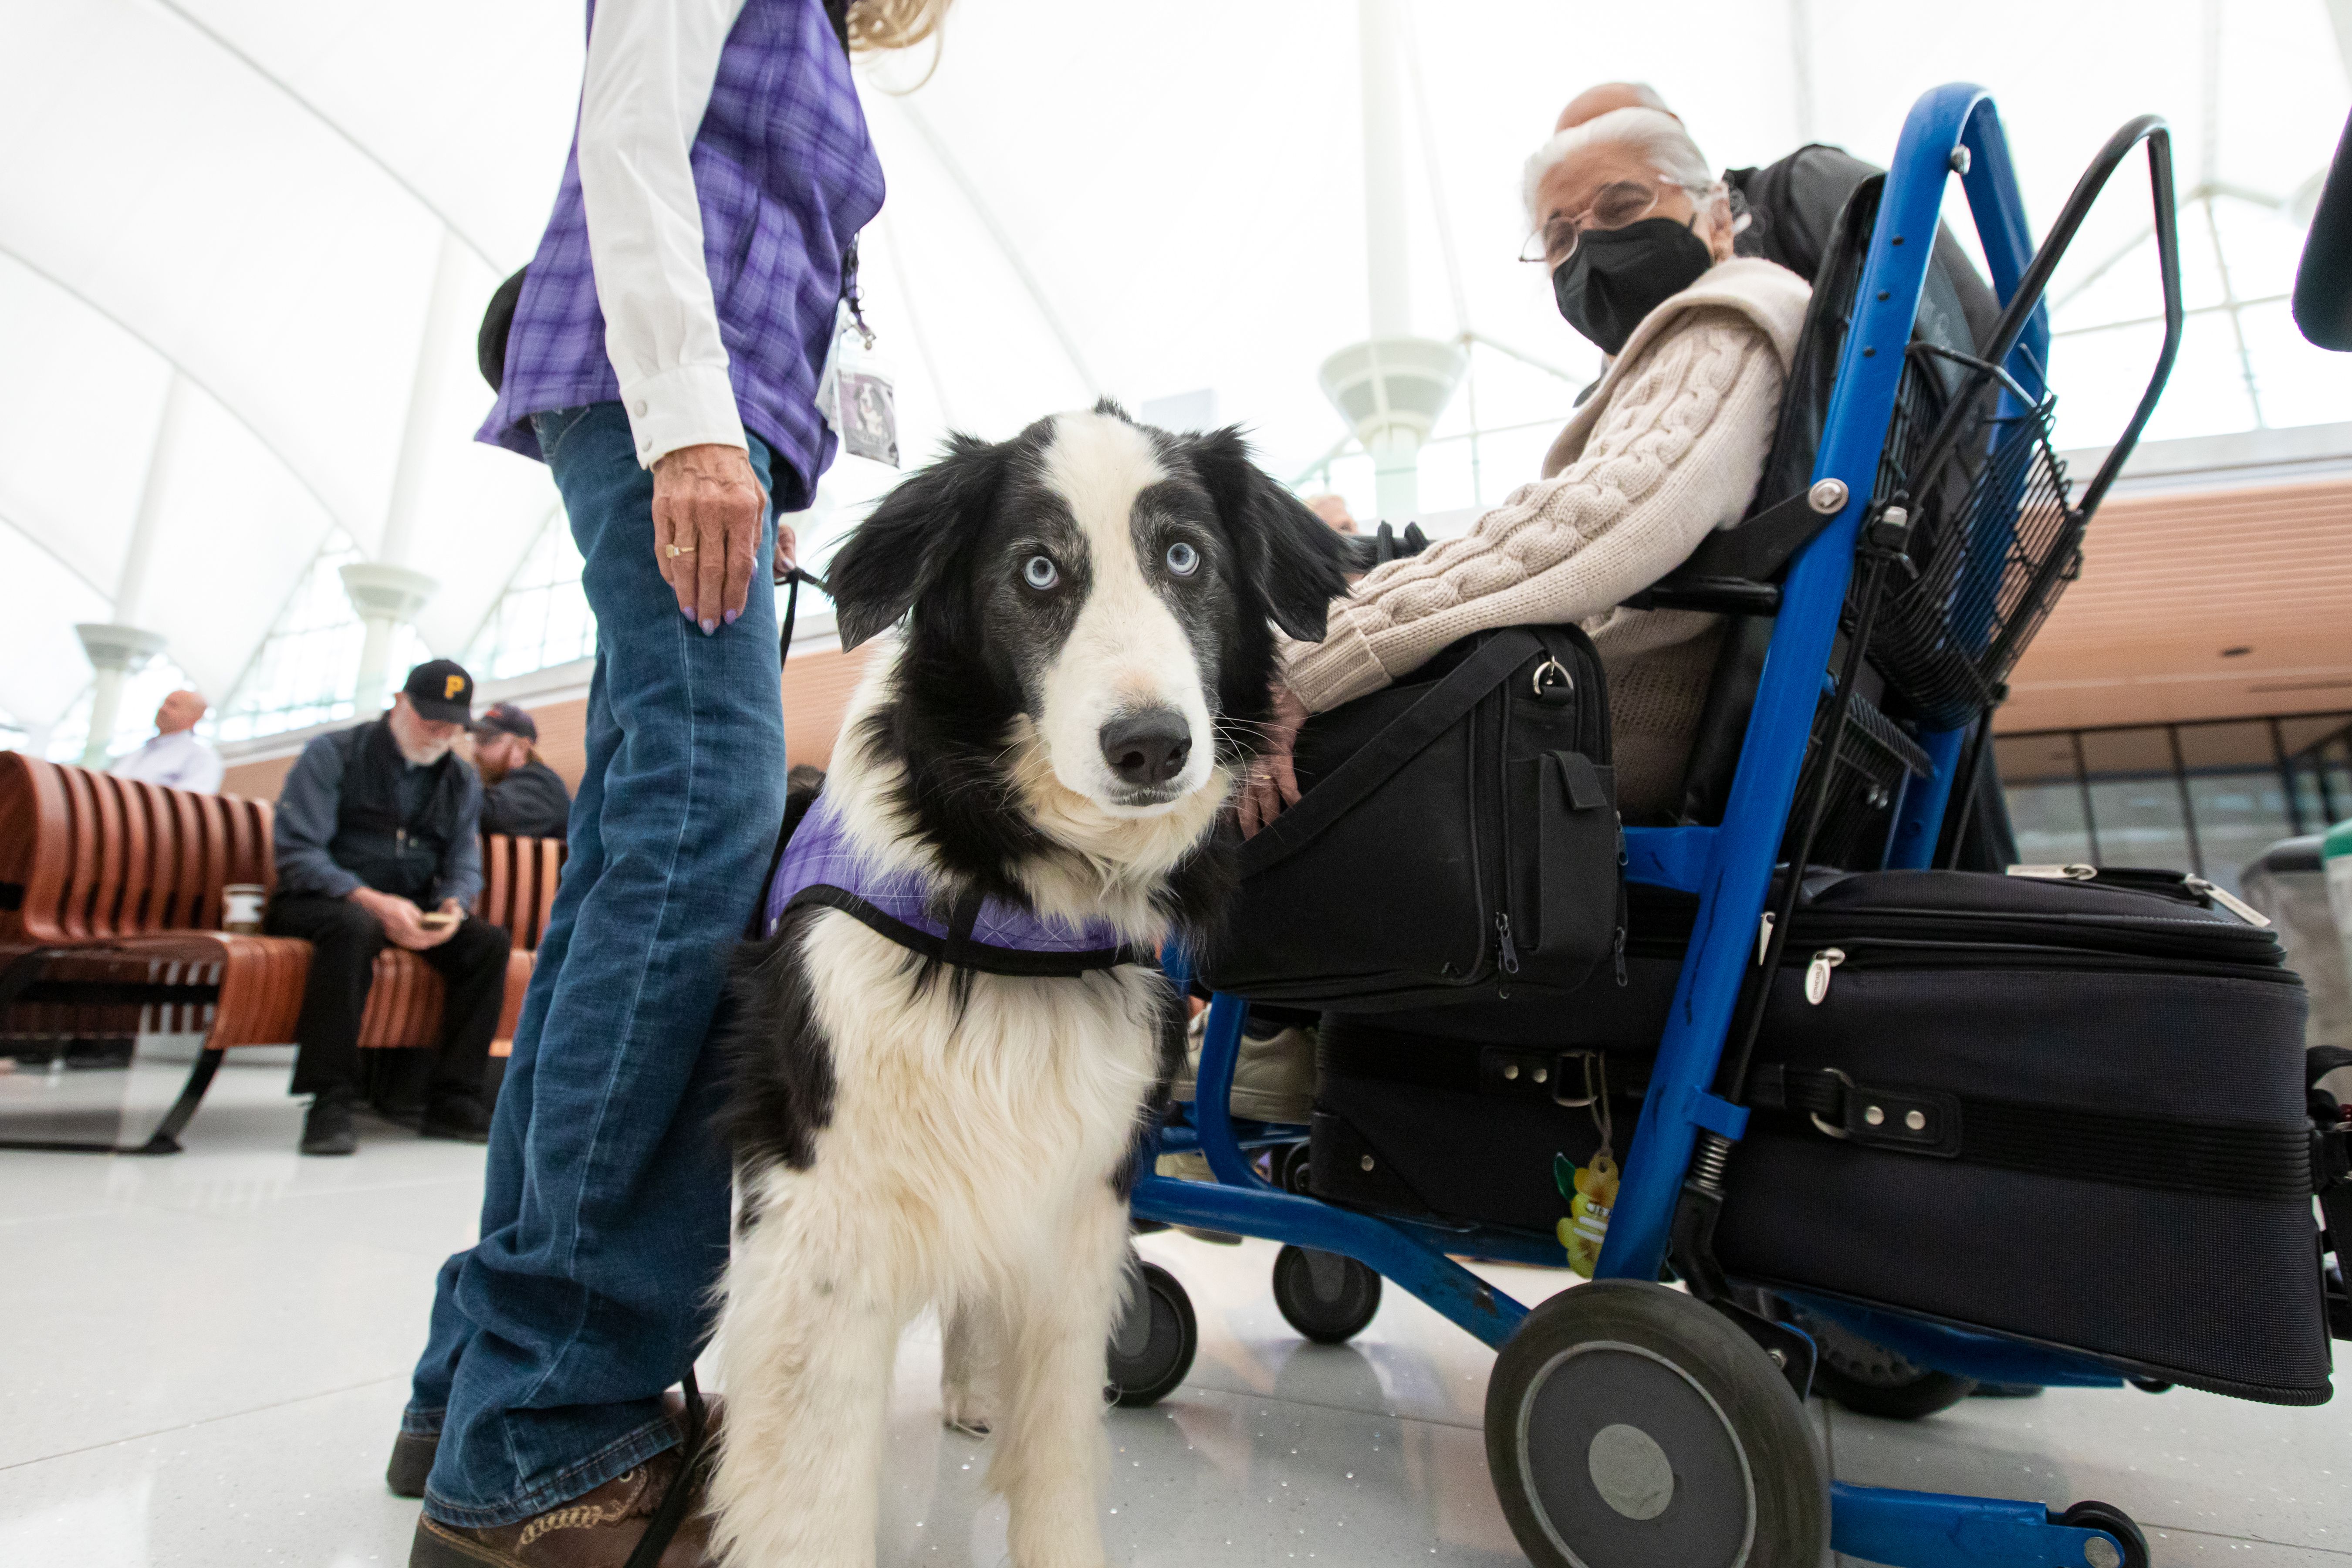 A service dog standing next to a passenger in an airport.